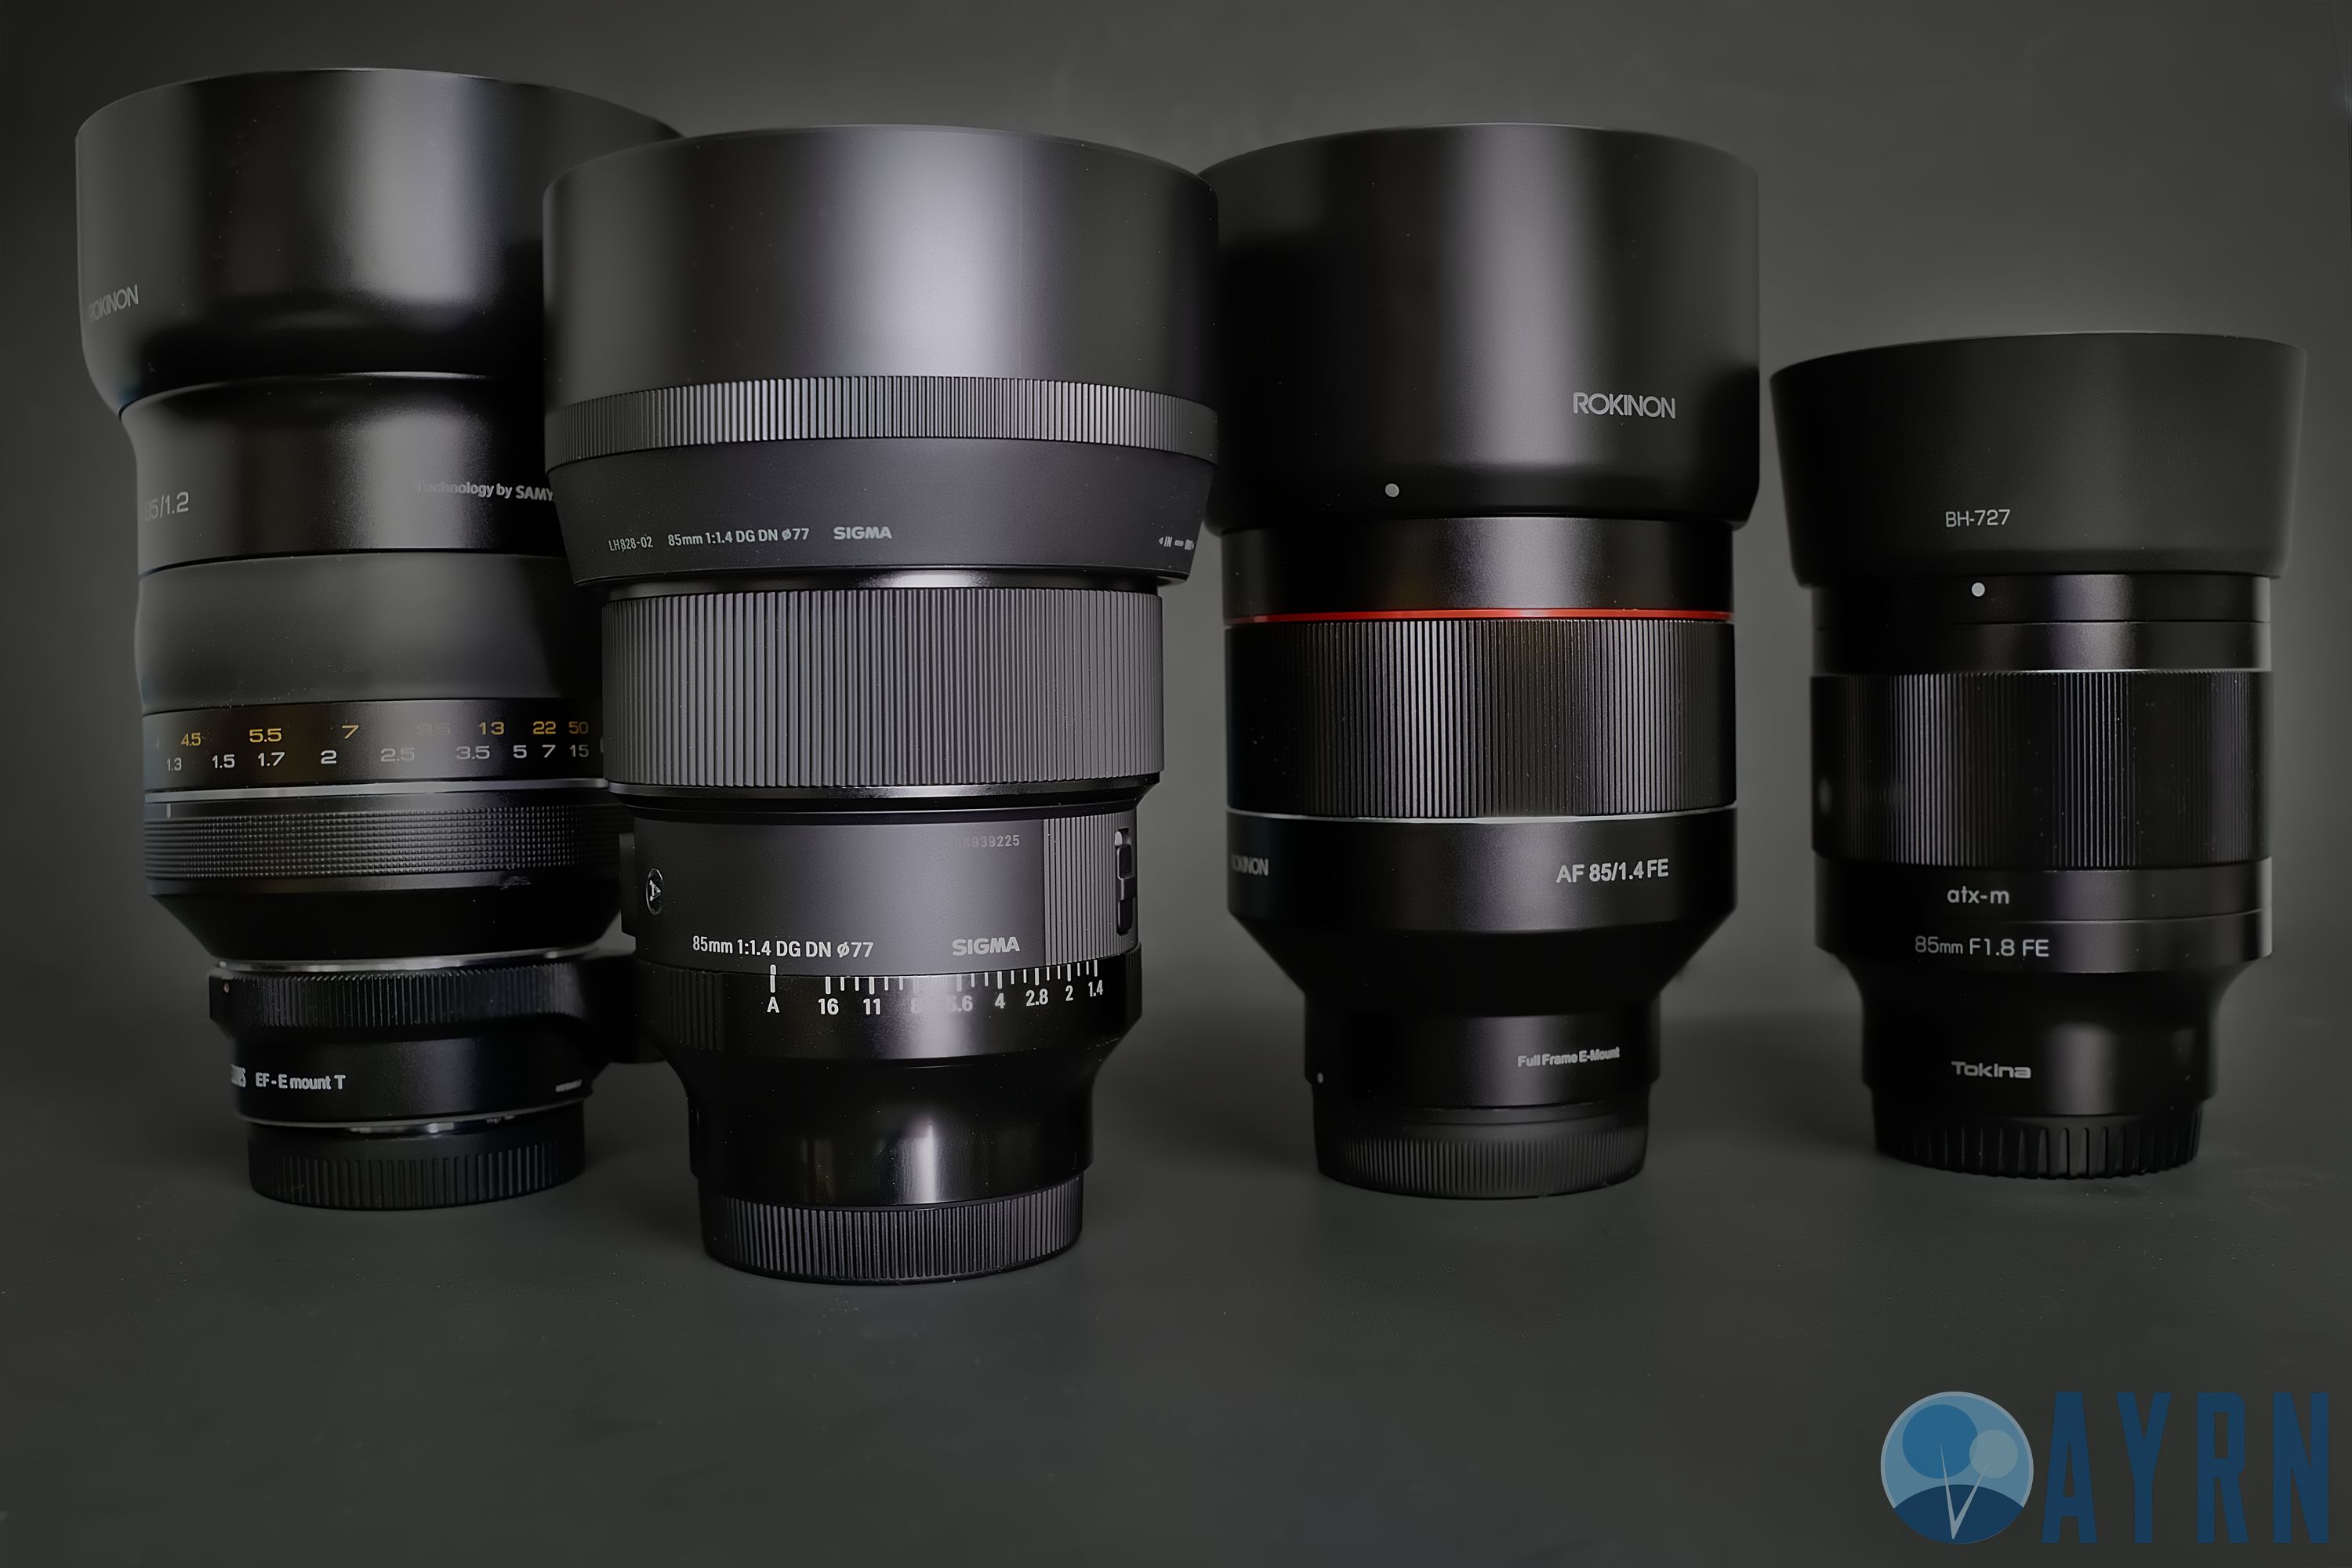 LEFT TO RIGHT: ROKINON 85MM F/1.2 XP, SIGMA 85MM F/1.4 DG DN ART, SAMYANG AF 85MM F/1.4, AND TOKINA 85MM F/1.8 ATX-M